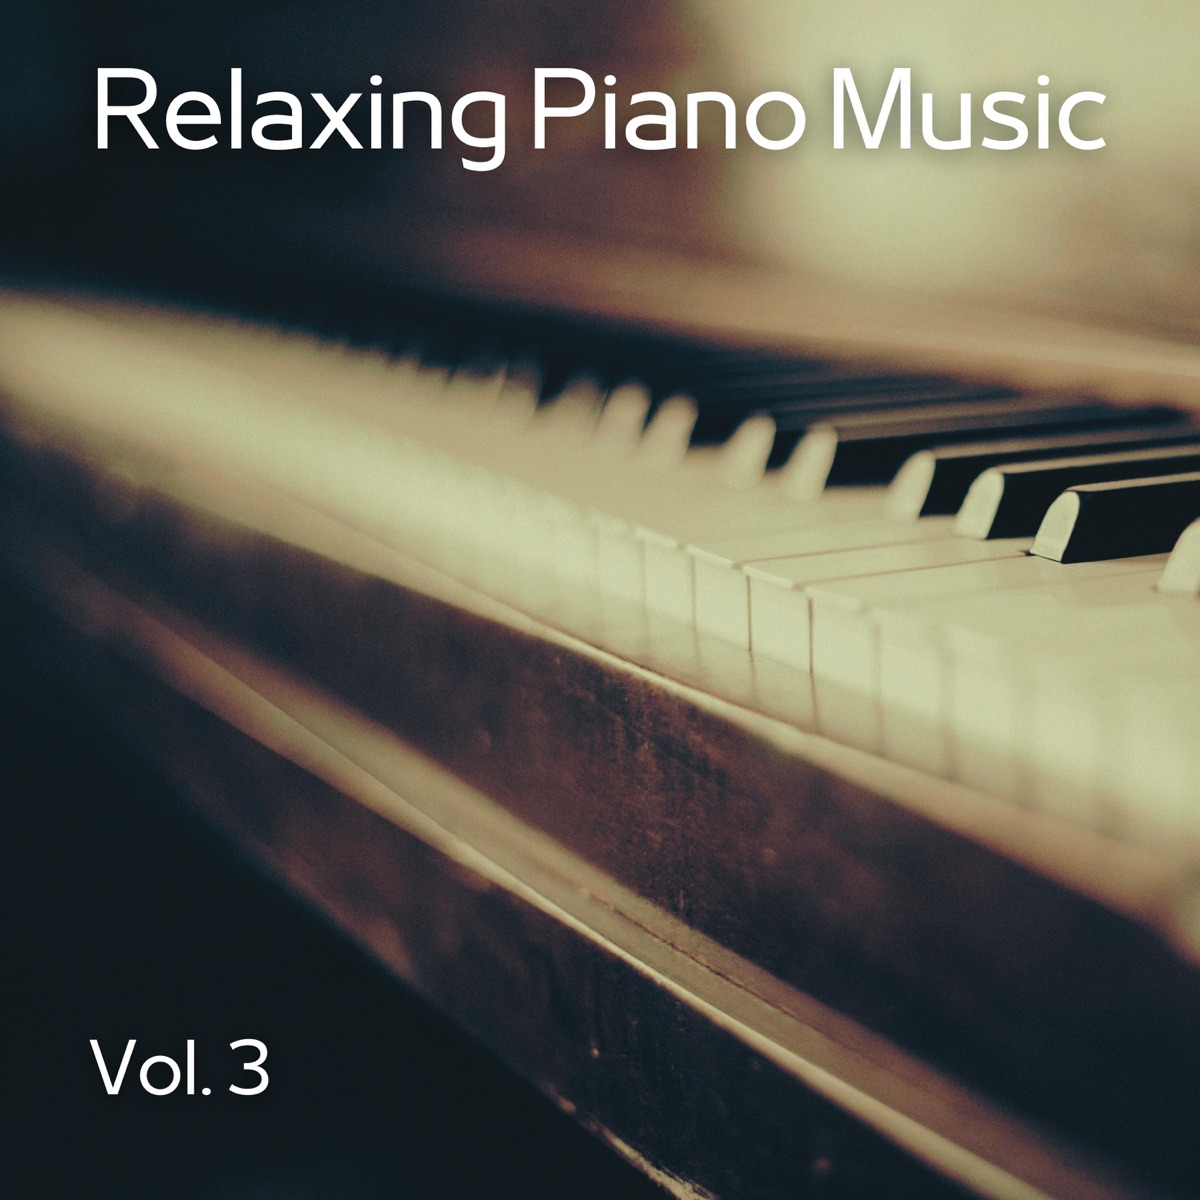 Relaxing Piano Music: Piano Music Relaxation, Piano Music Lullaby, Piano  Songs, Quiet Music and Romantic Piano Notes by Relaxing Piano Music on  Apple Music